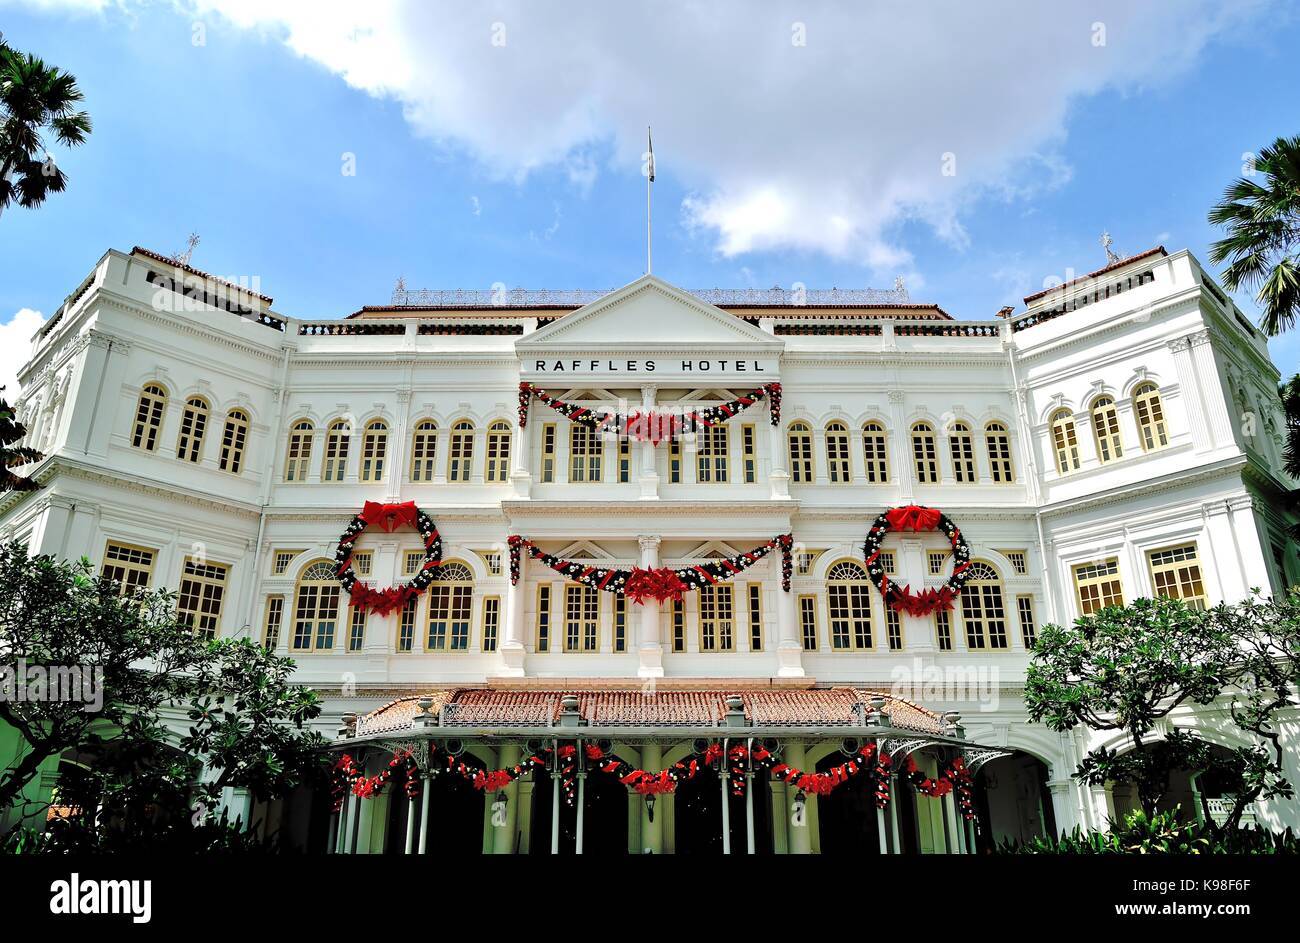 Raffles Hotel, Singapore, decked out in Xmas decorations Stock Photo